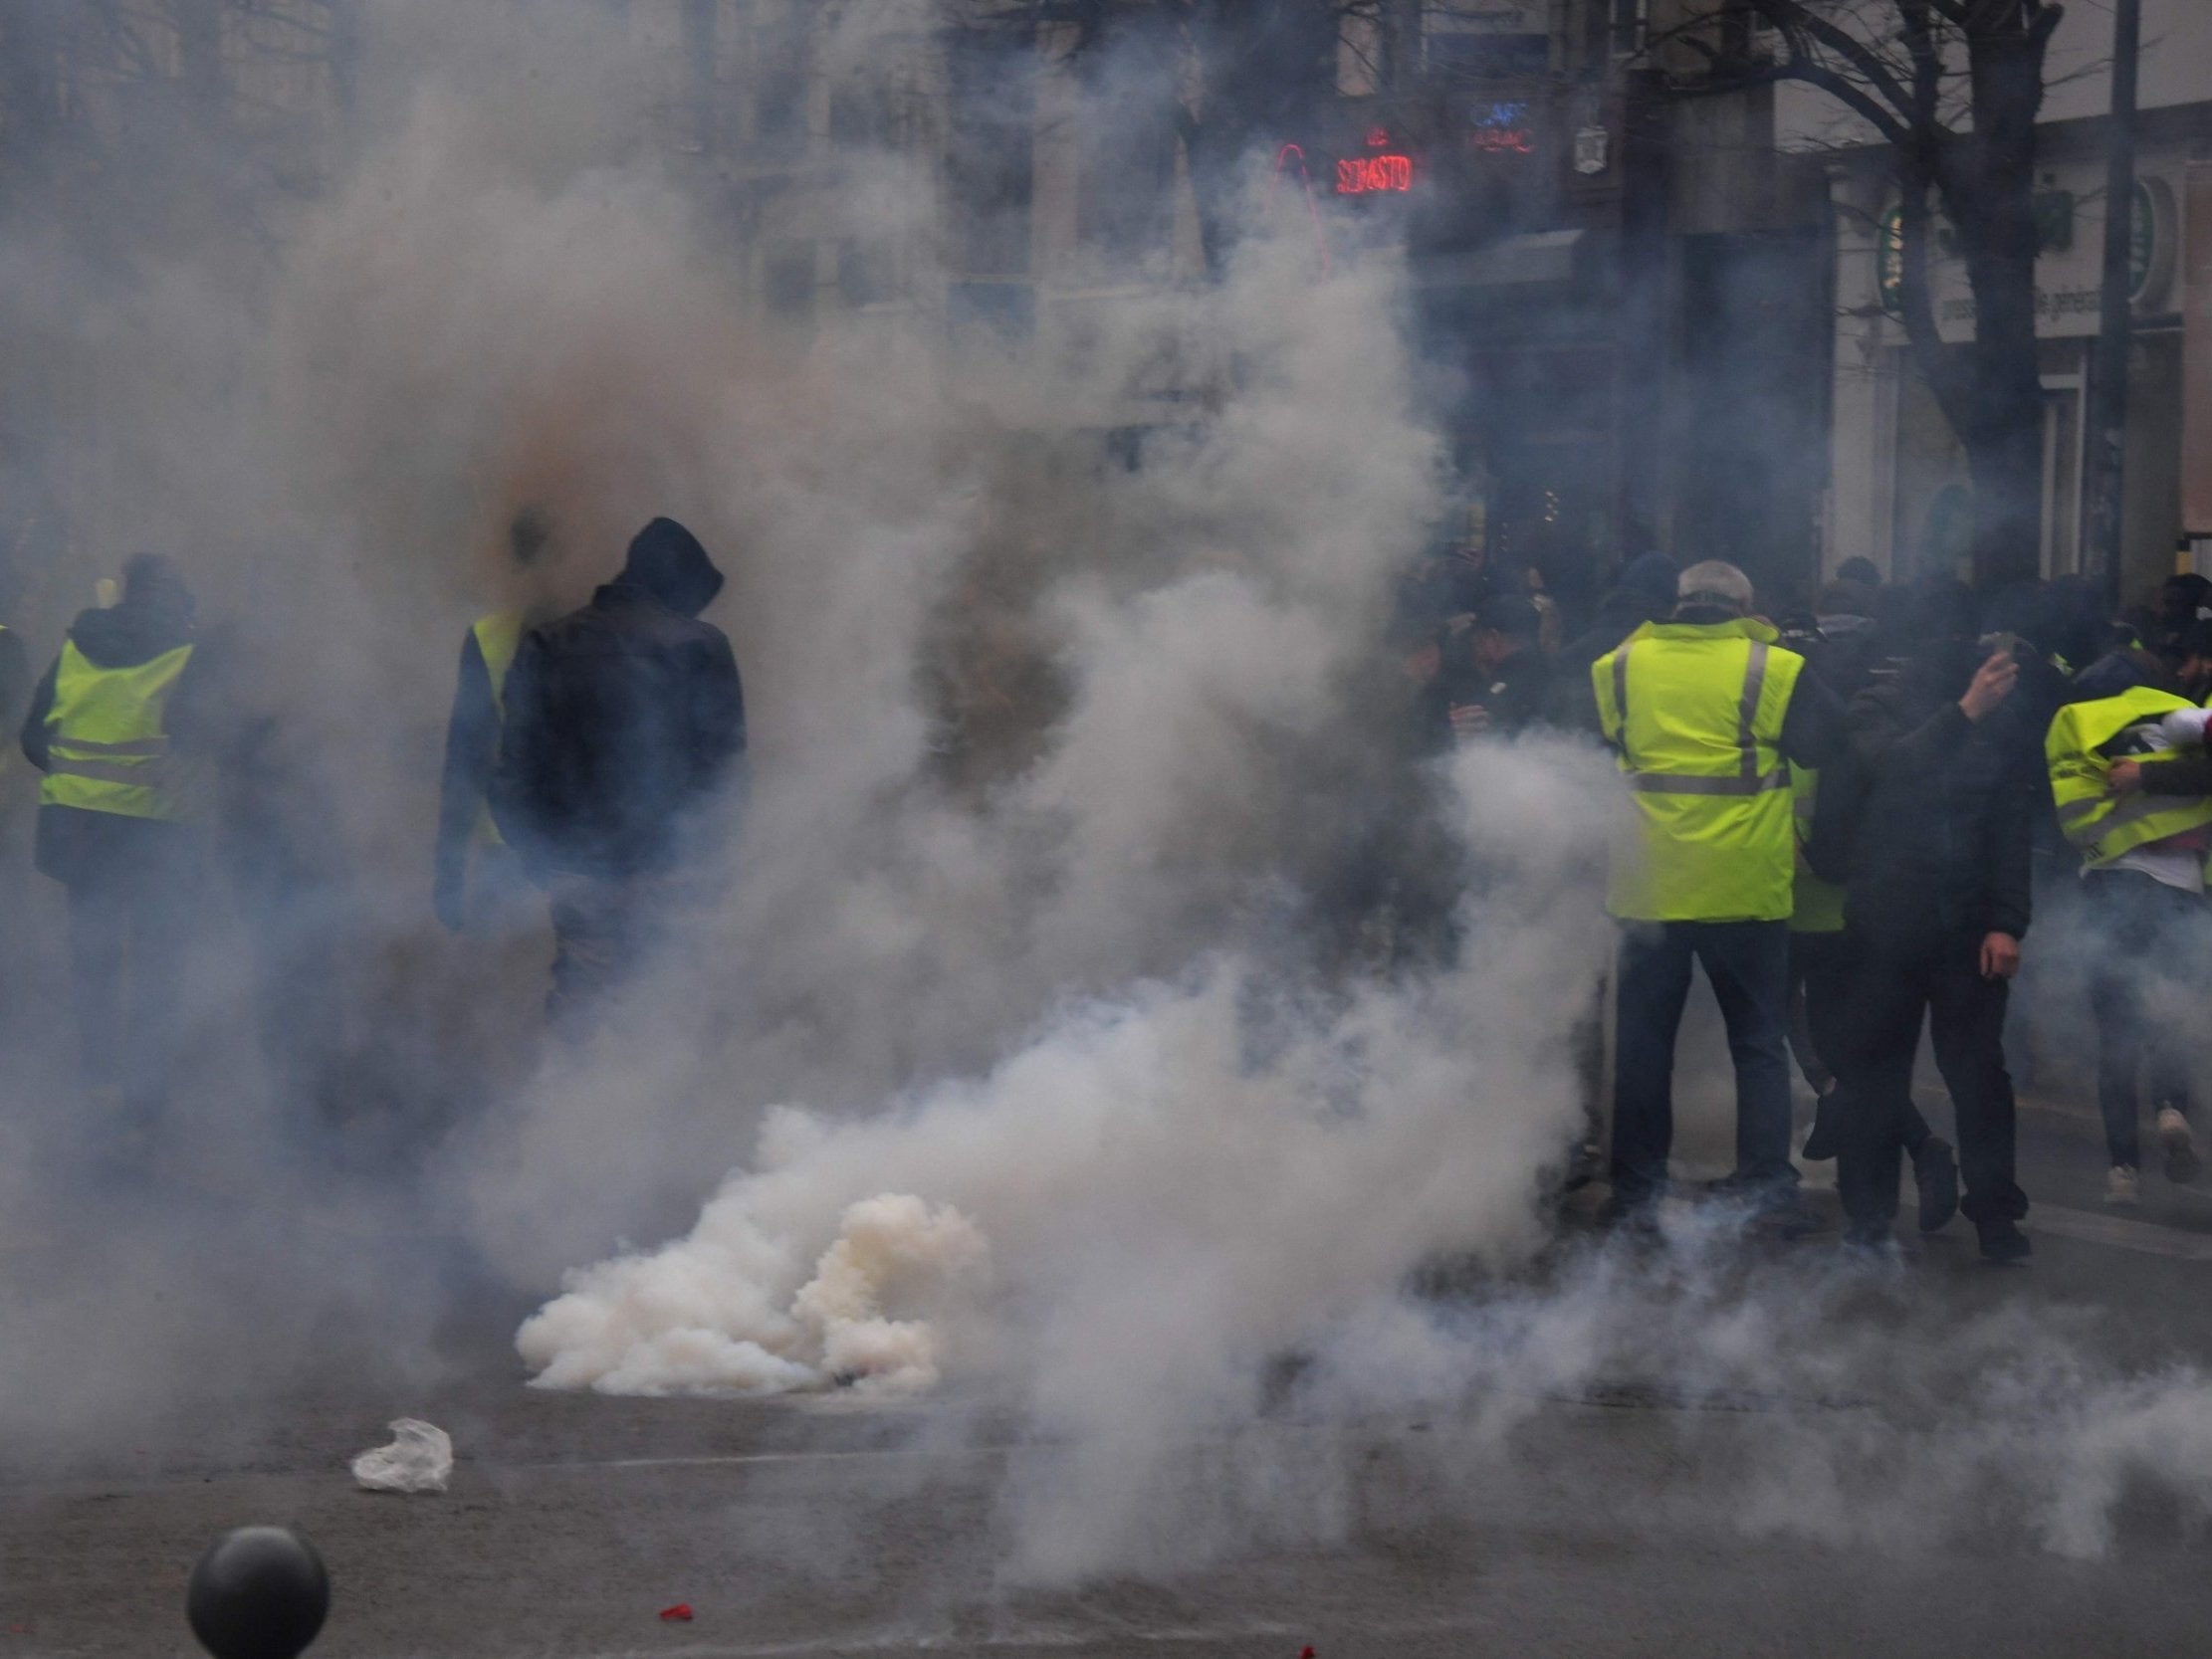 Protesters stand in tear gas smoke during a 'yellow vest' anti-government demonstration in Lille, on Saturday